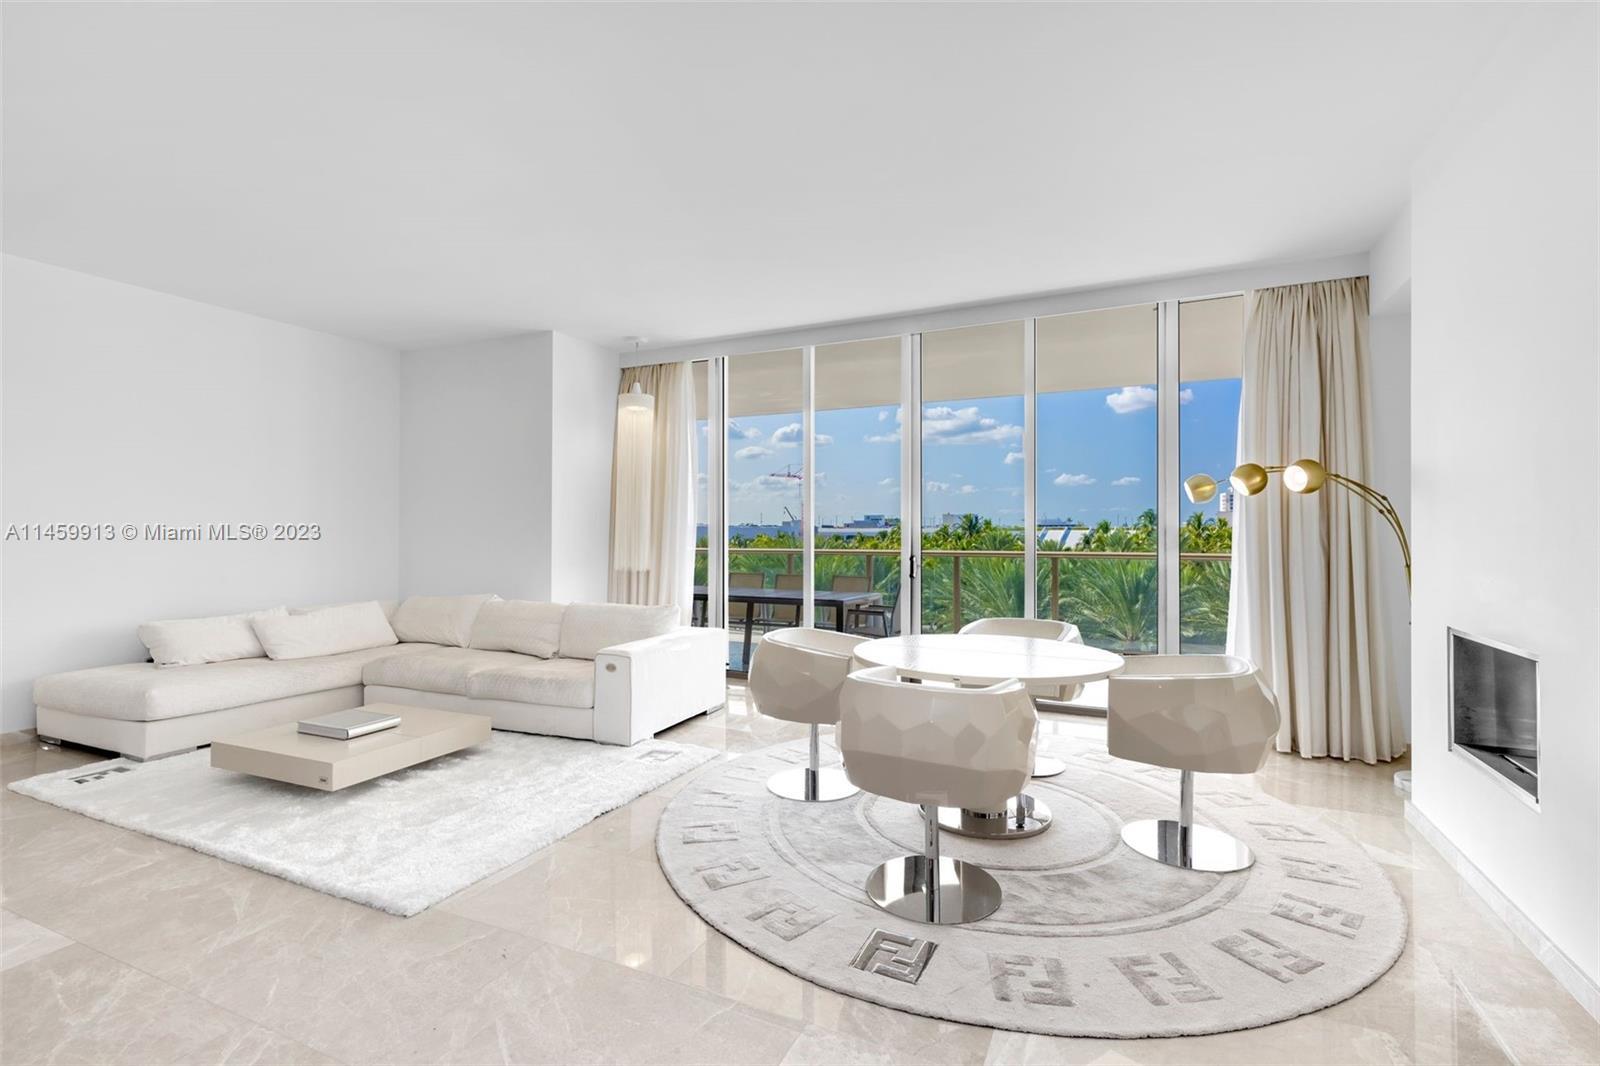 Photo of 9701 Collins Ave #405S in Bal Harbour, FL